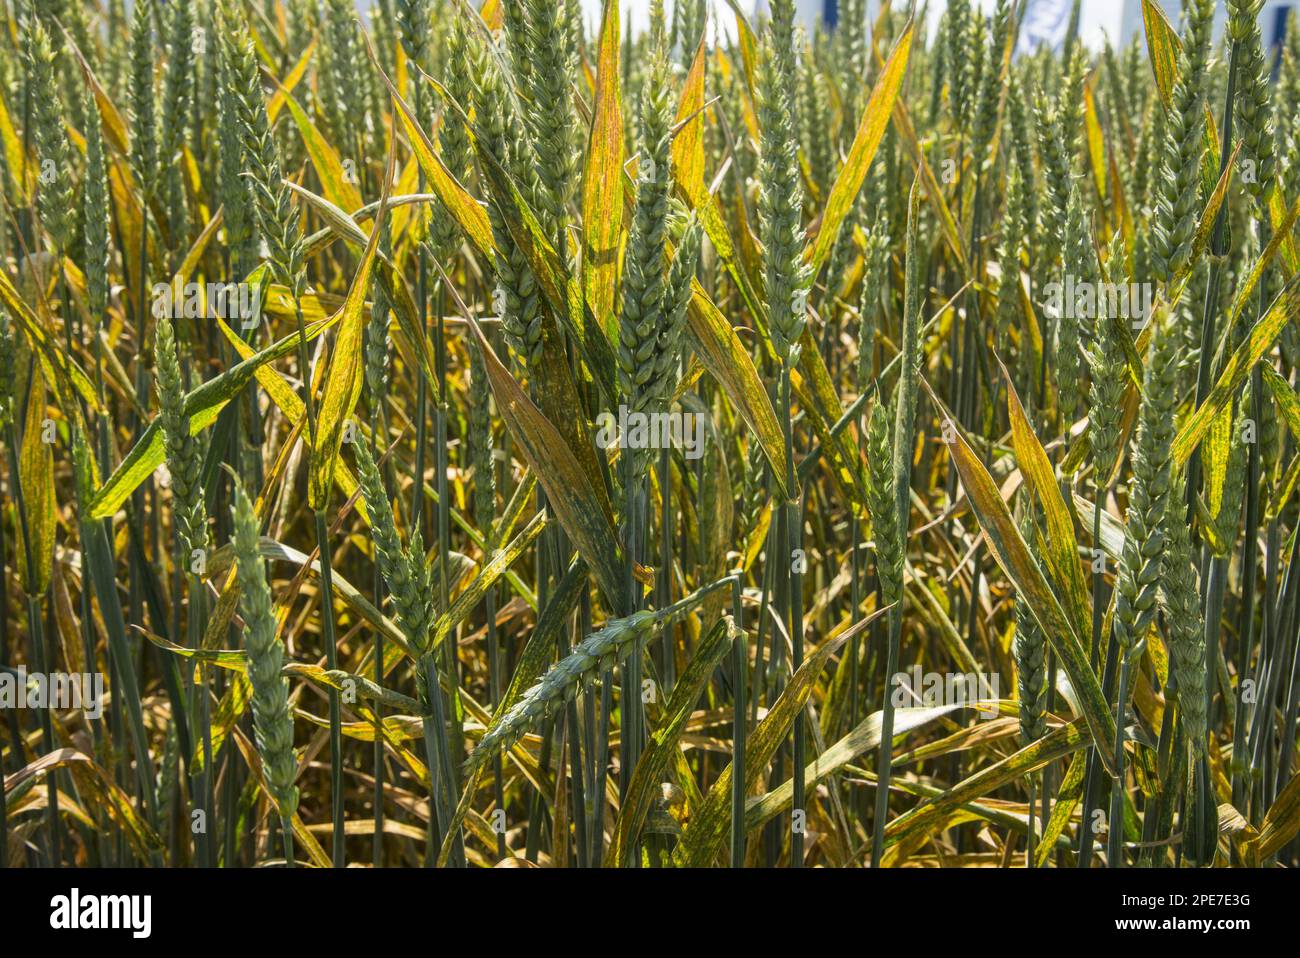 Wheat (Triticum aestivum) crop, leaves infected with fungal disease yellow rust (Puccinia striiformis), Lincolnshire, England, United Kingdom Stock Photo